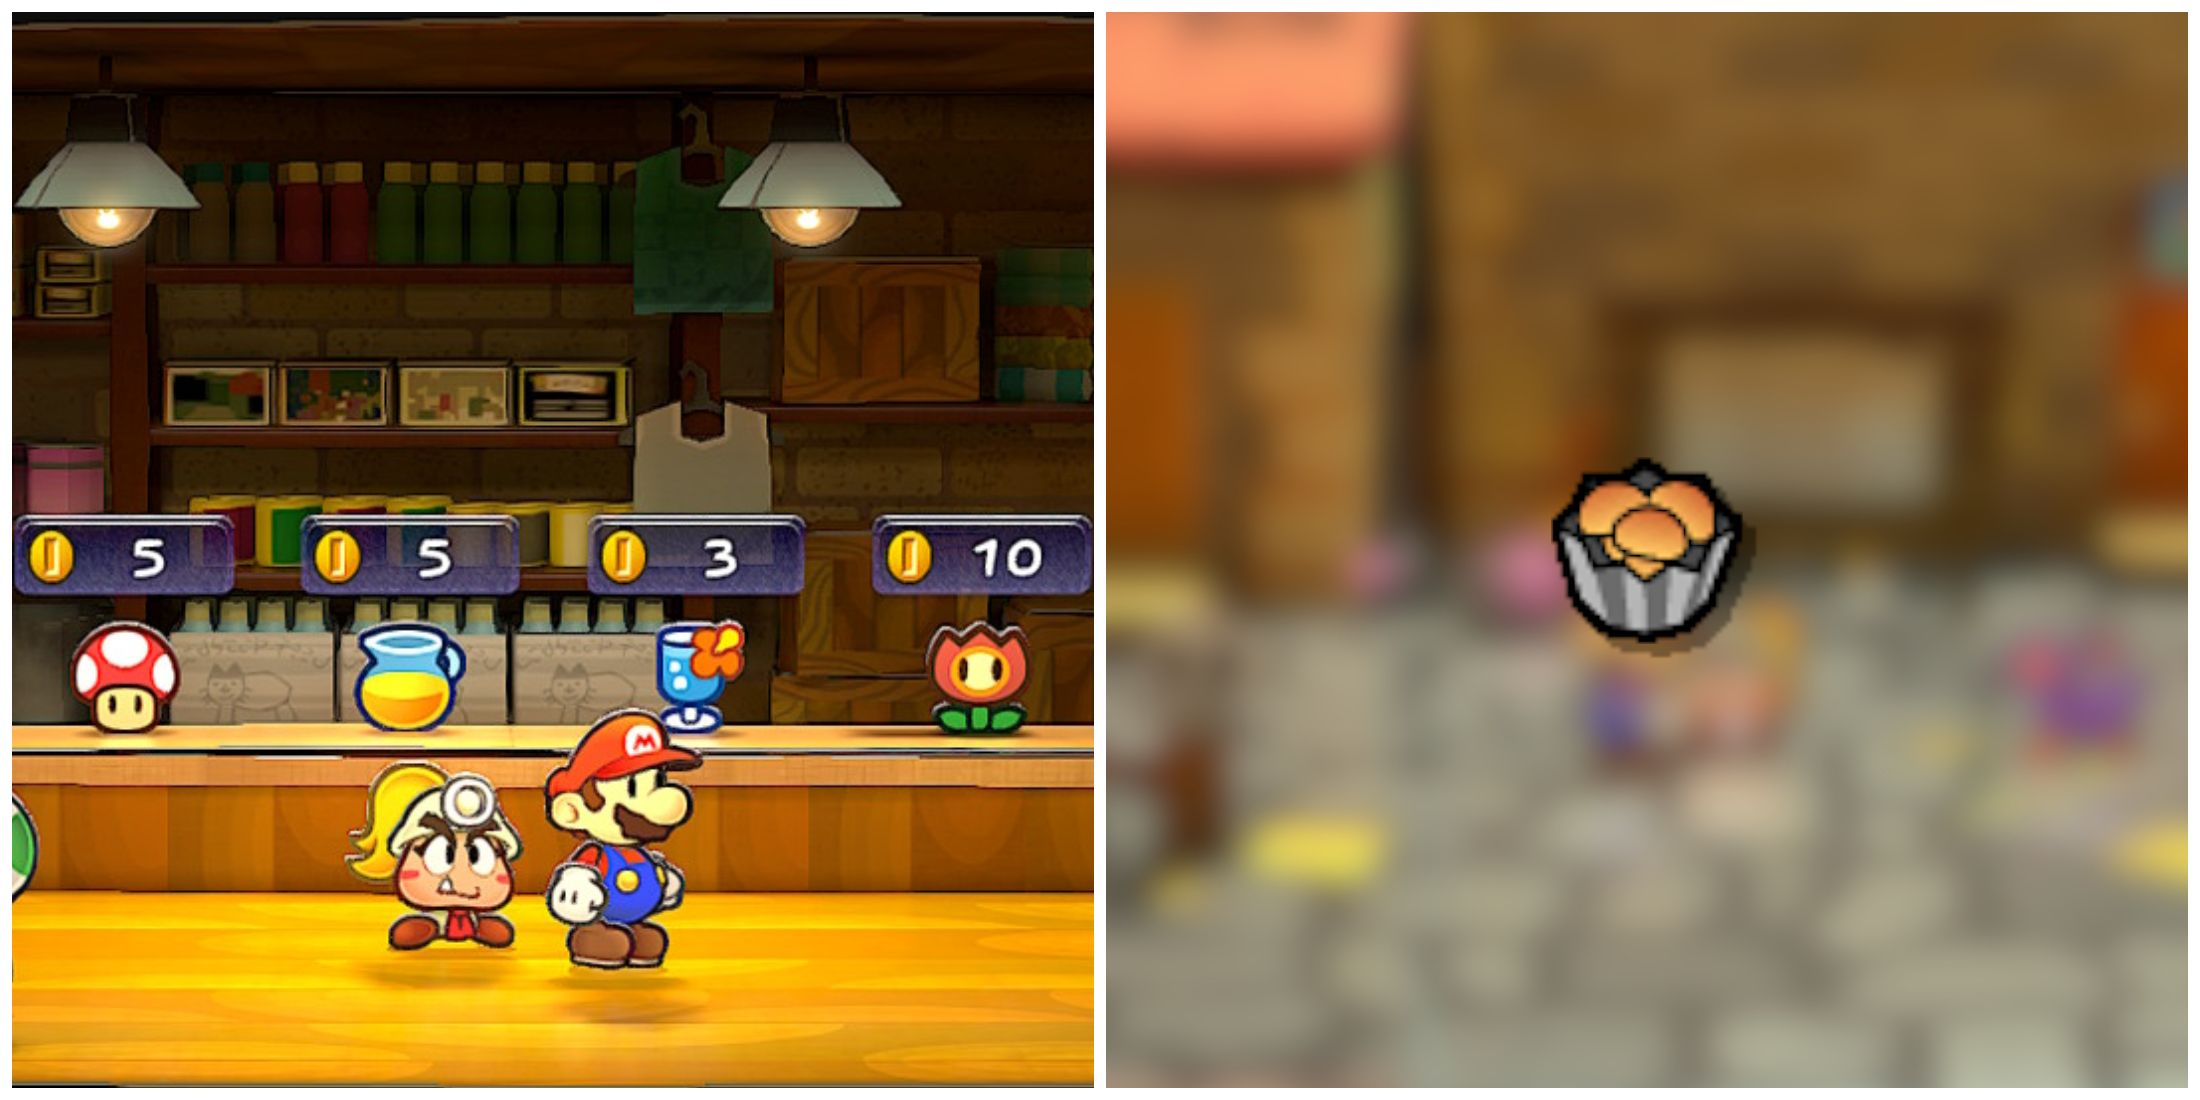 Split image of Mario and Goombella in a store and a Shroom Roast in Paper Mario: The Thousand-Year Door